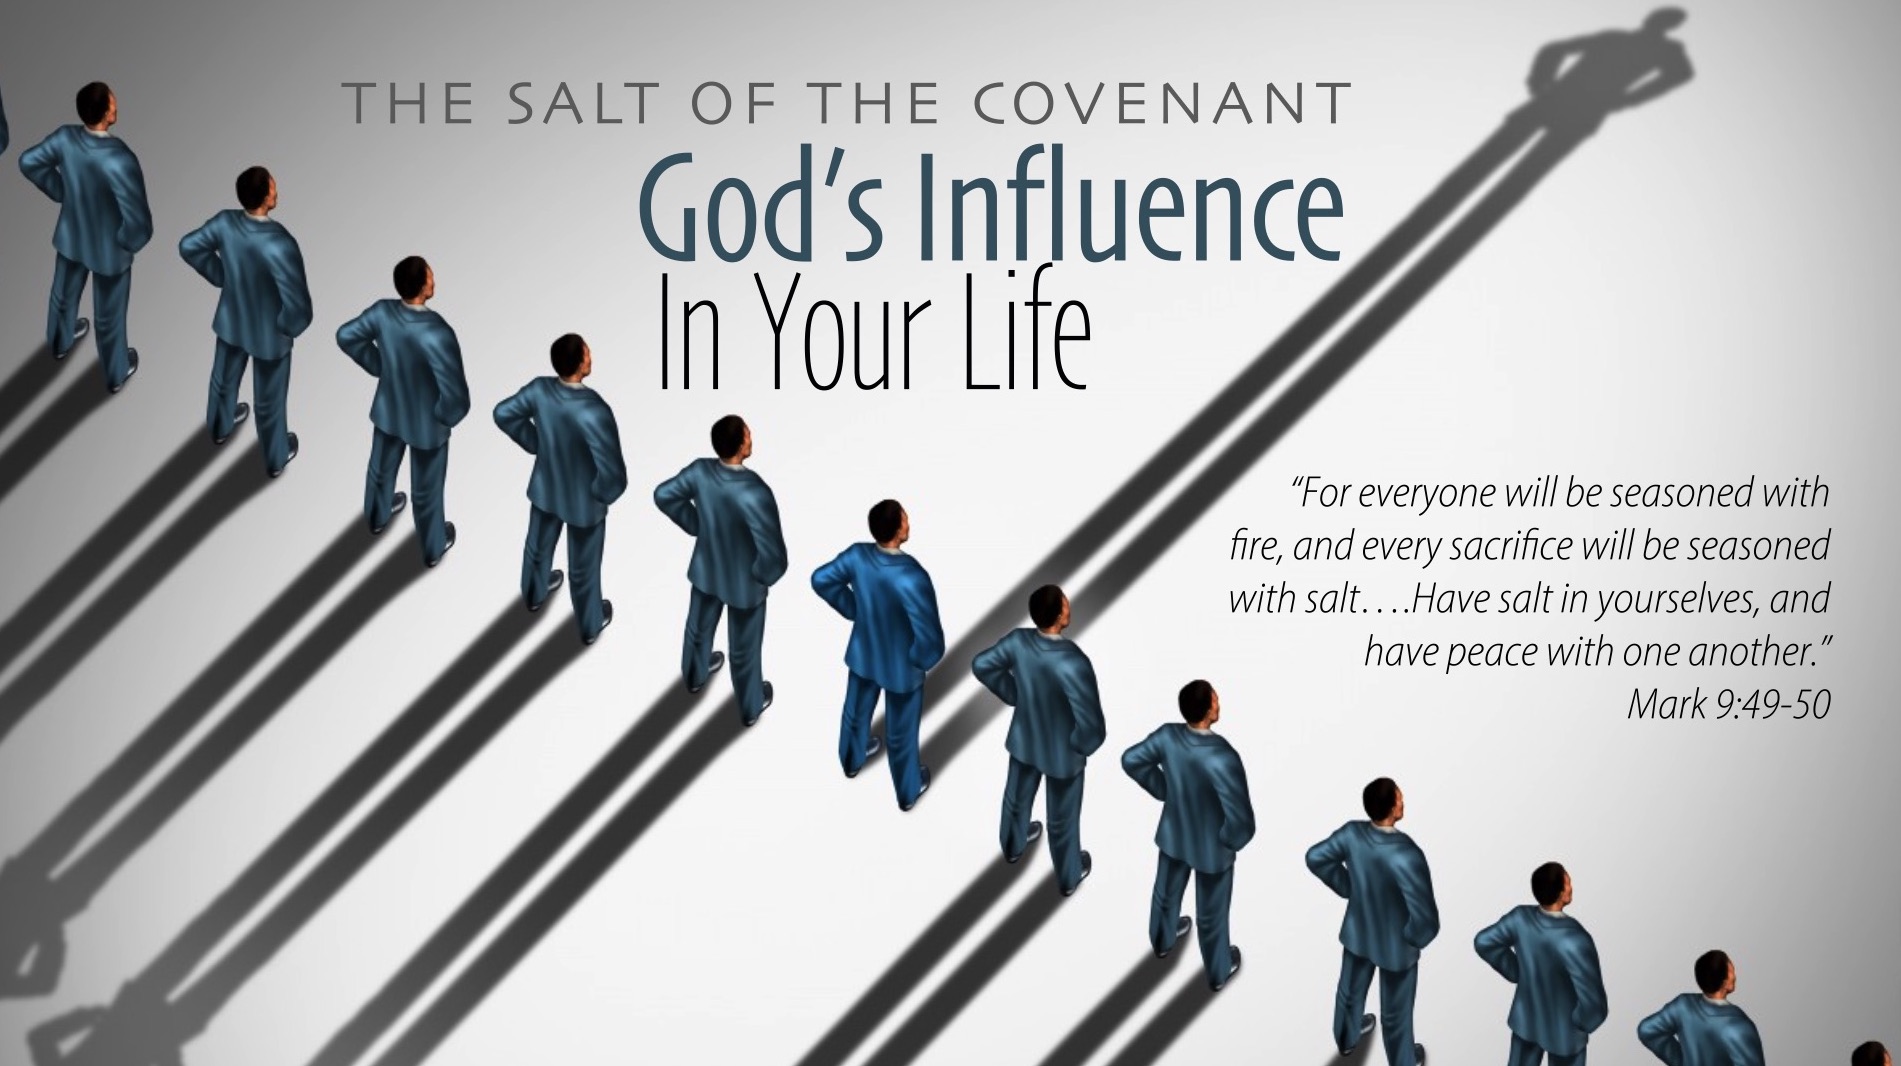 The Salt of the Covenant: God's Influence In Your Life